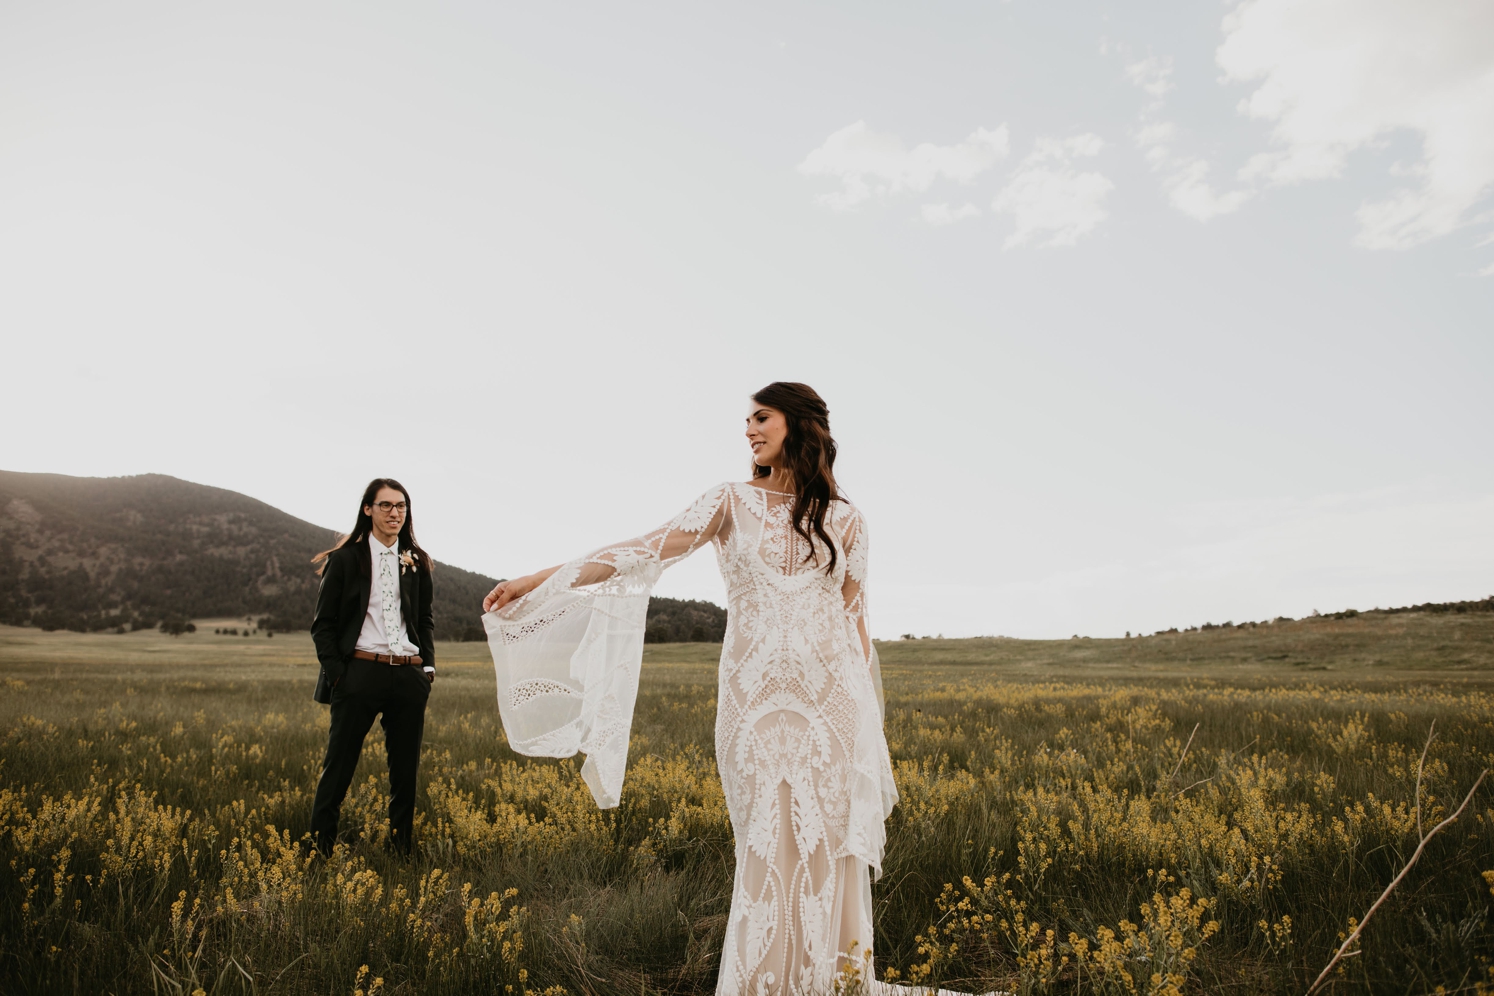 Bride wearing long sleeve lace wedding gown with bell sleeves standing in field with groom behind her | McArthur Weddings and Events